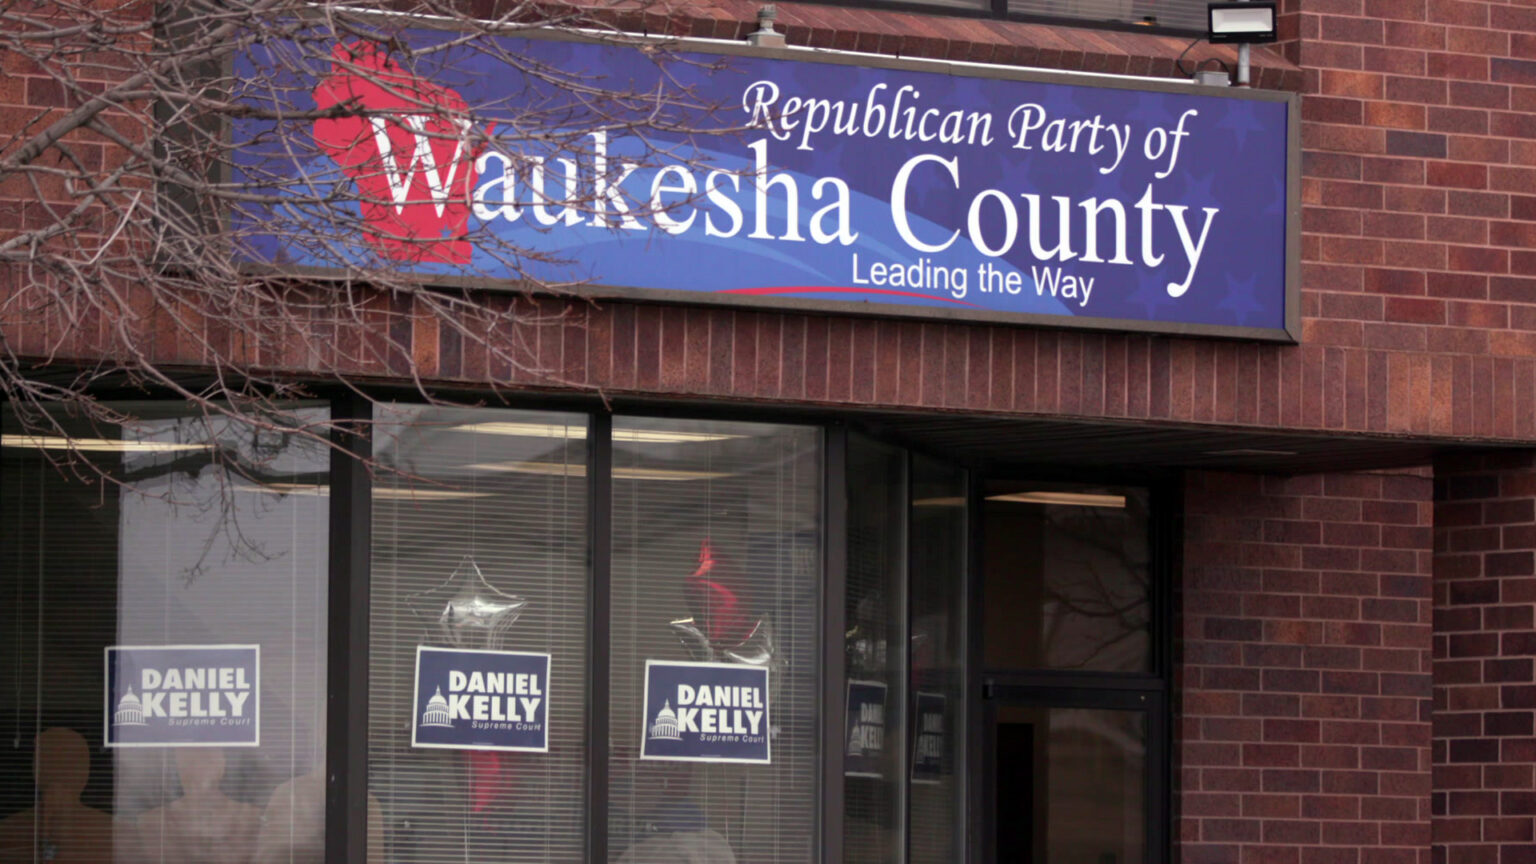 A sign reading Republican Party of Waukesha County and Leading the Way is mounted above a door into a brick building, with signs reading Daniel Kelly and Supreme Court in its windows.